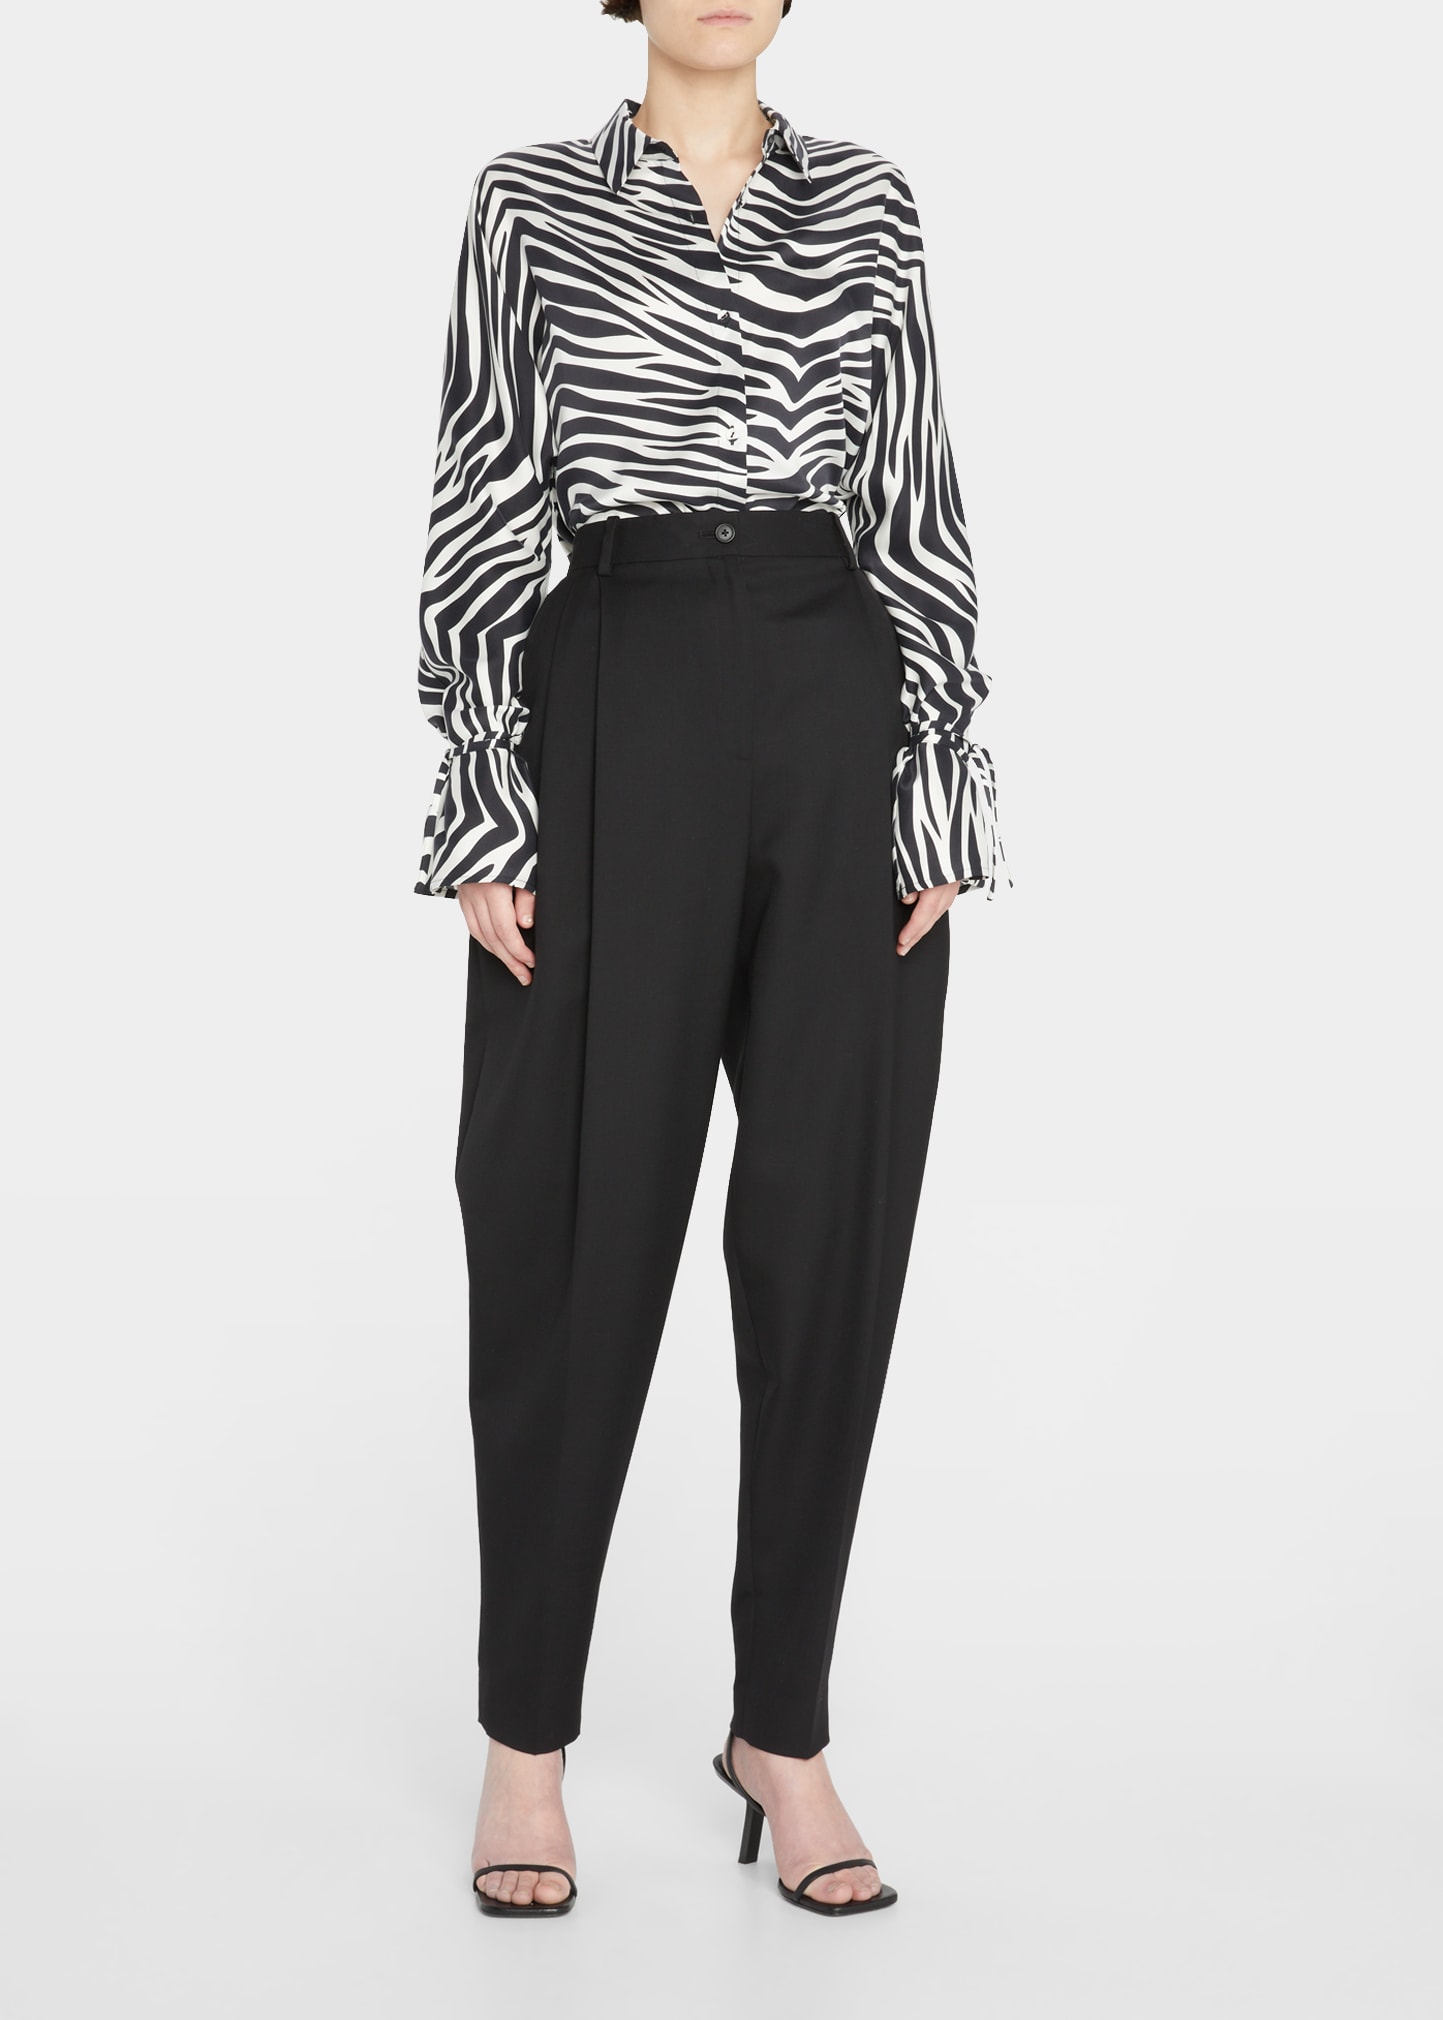 Tove Zebra Button-Front Tied Cuff Shirt